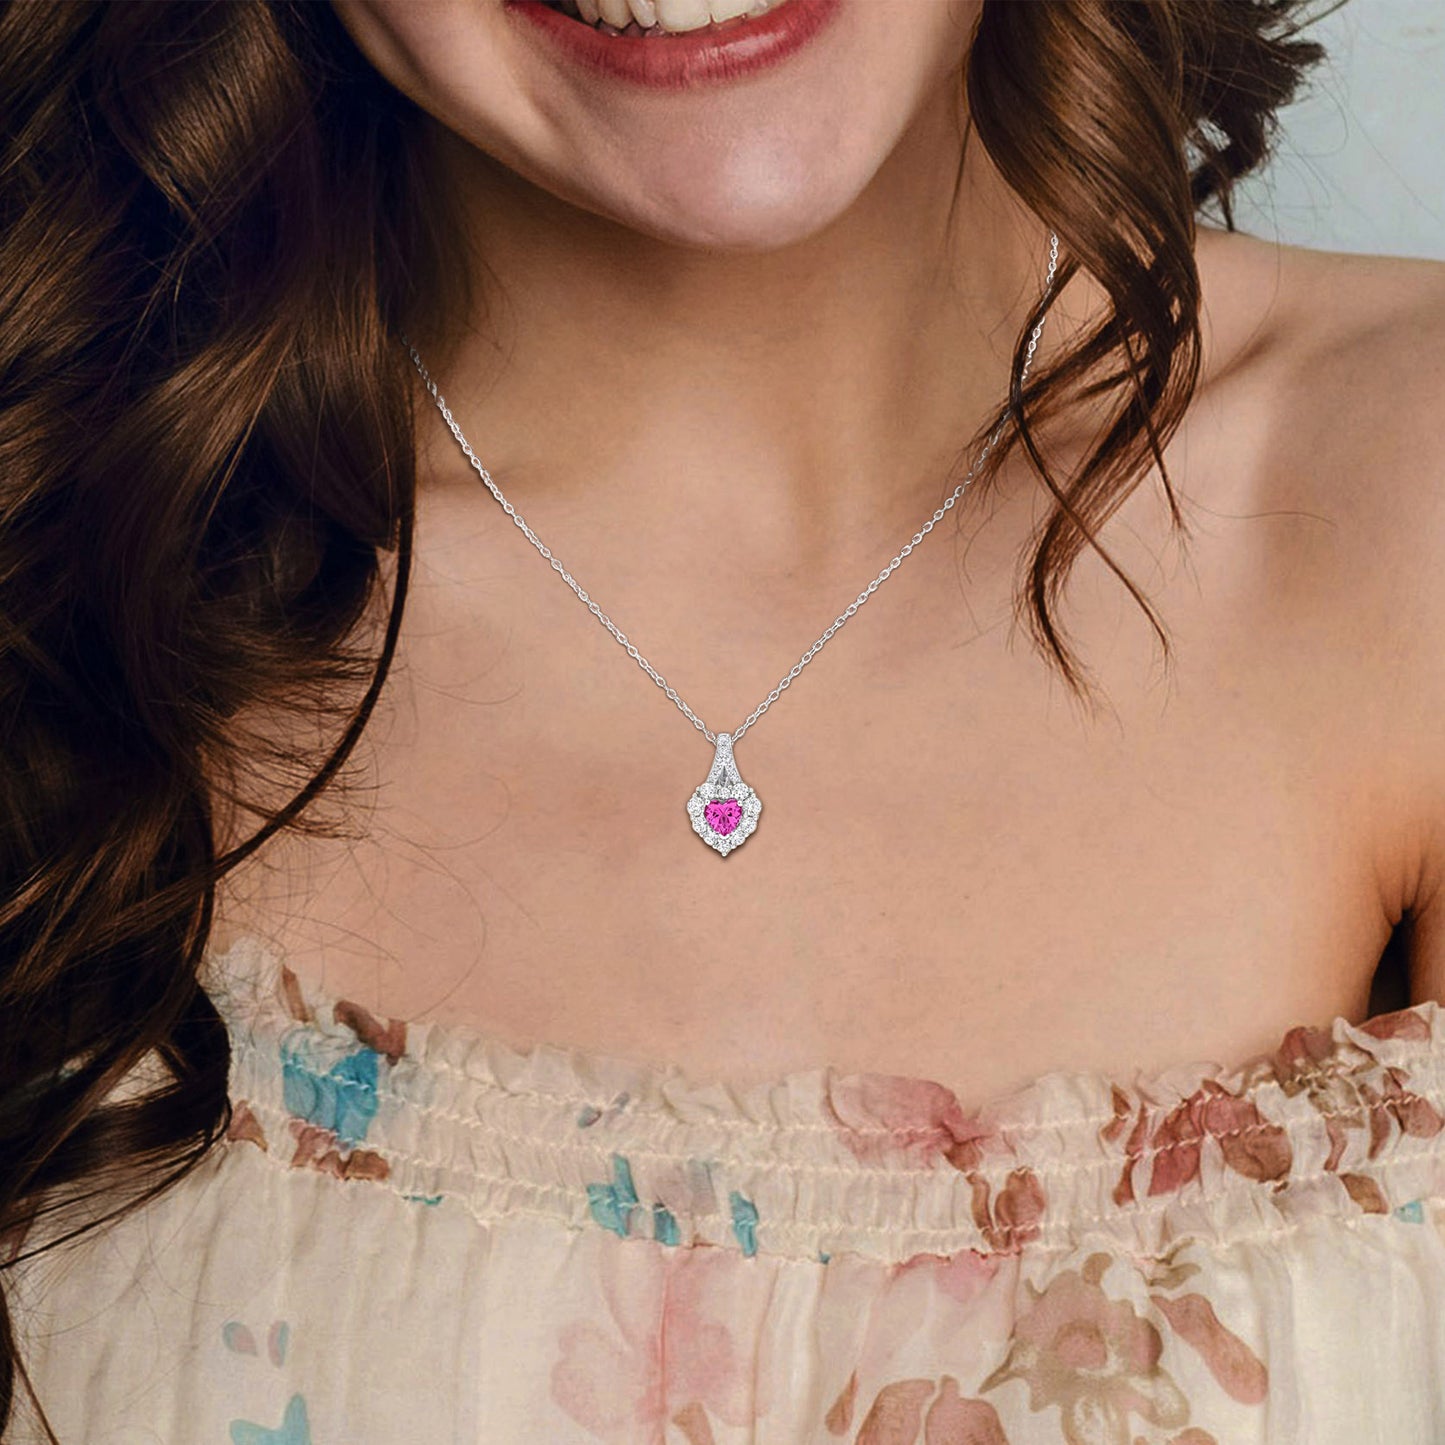 2 7/8 CT TGW Created Pink Sapphire Created White Sapphire Fashion Pendant With Chain Silver